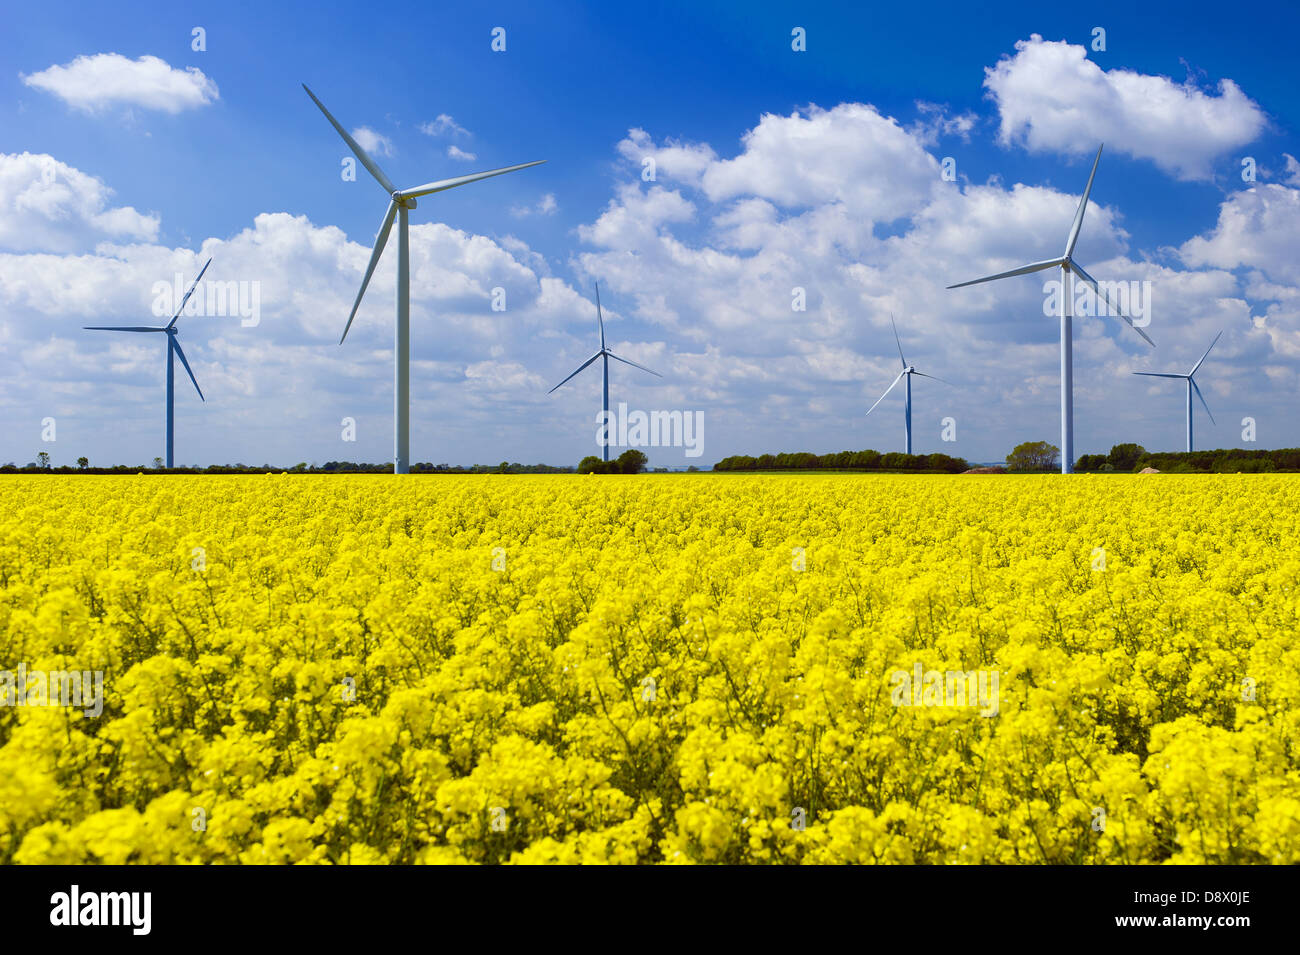 Renewable energy wind turbine farms in a field in Yorkshire showing yellow rape seed in bloom taken against a blue sky with white clouds above. Stock Photo